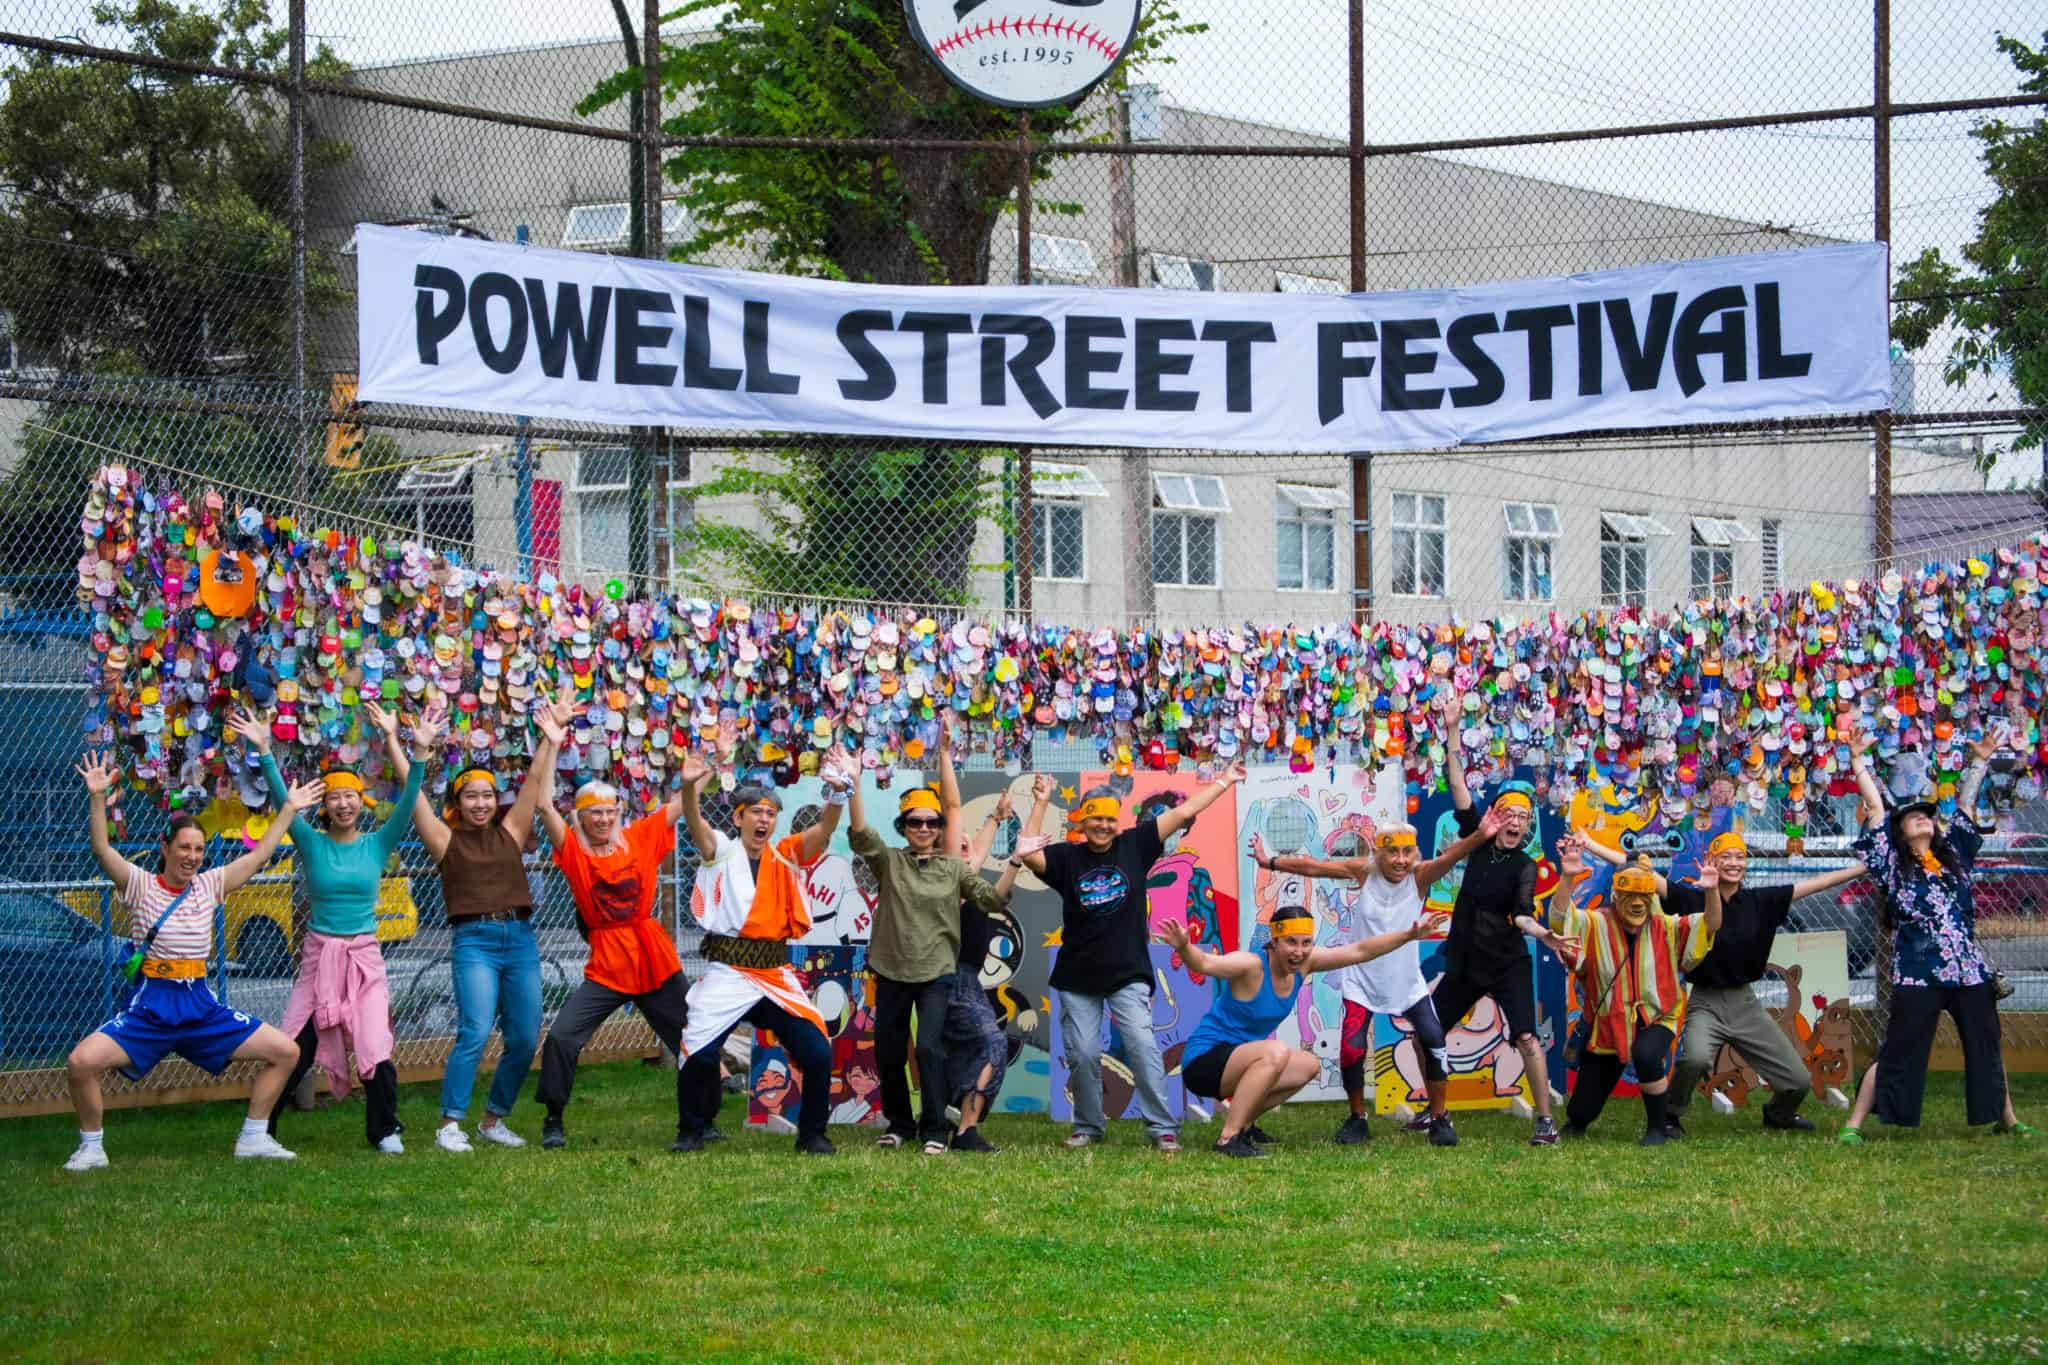 Powell Street Festival Society Read the 2021 Annual Report Now!